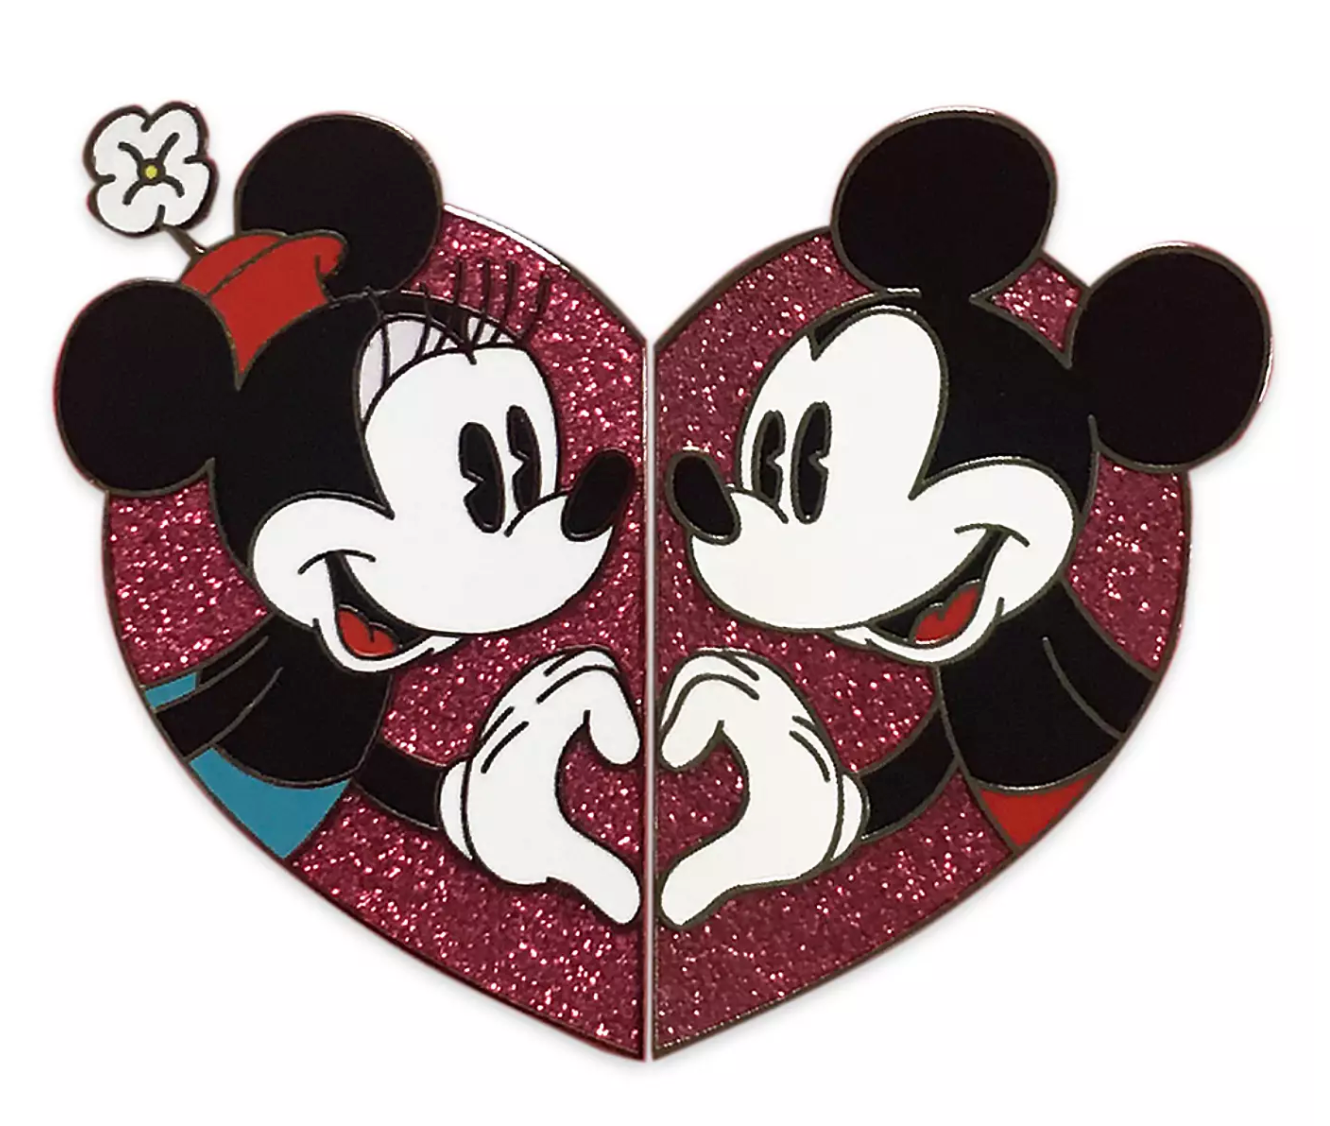 Disney Parks Valentine Heart Mickey and Minnie Keep One Share One Pin New w Card